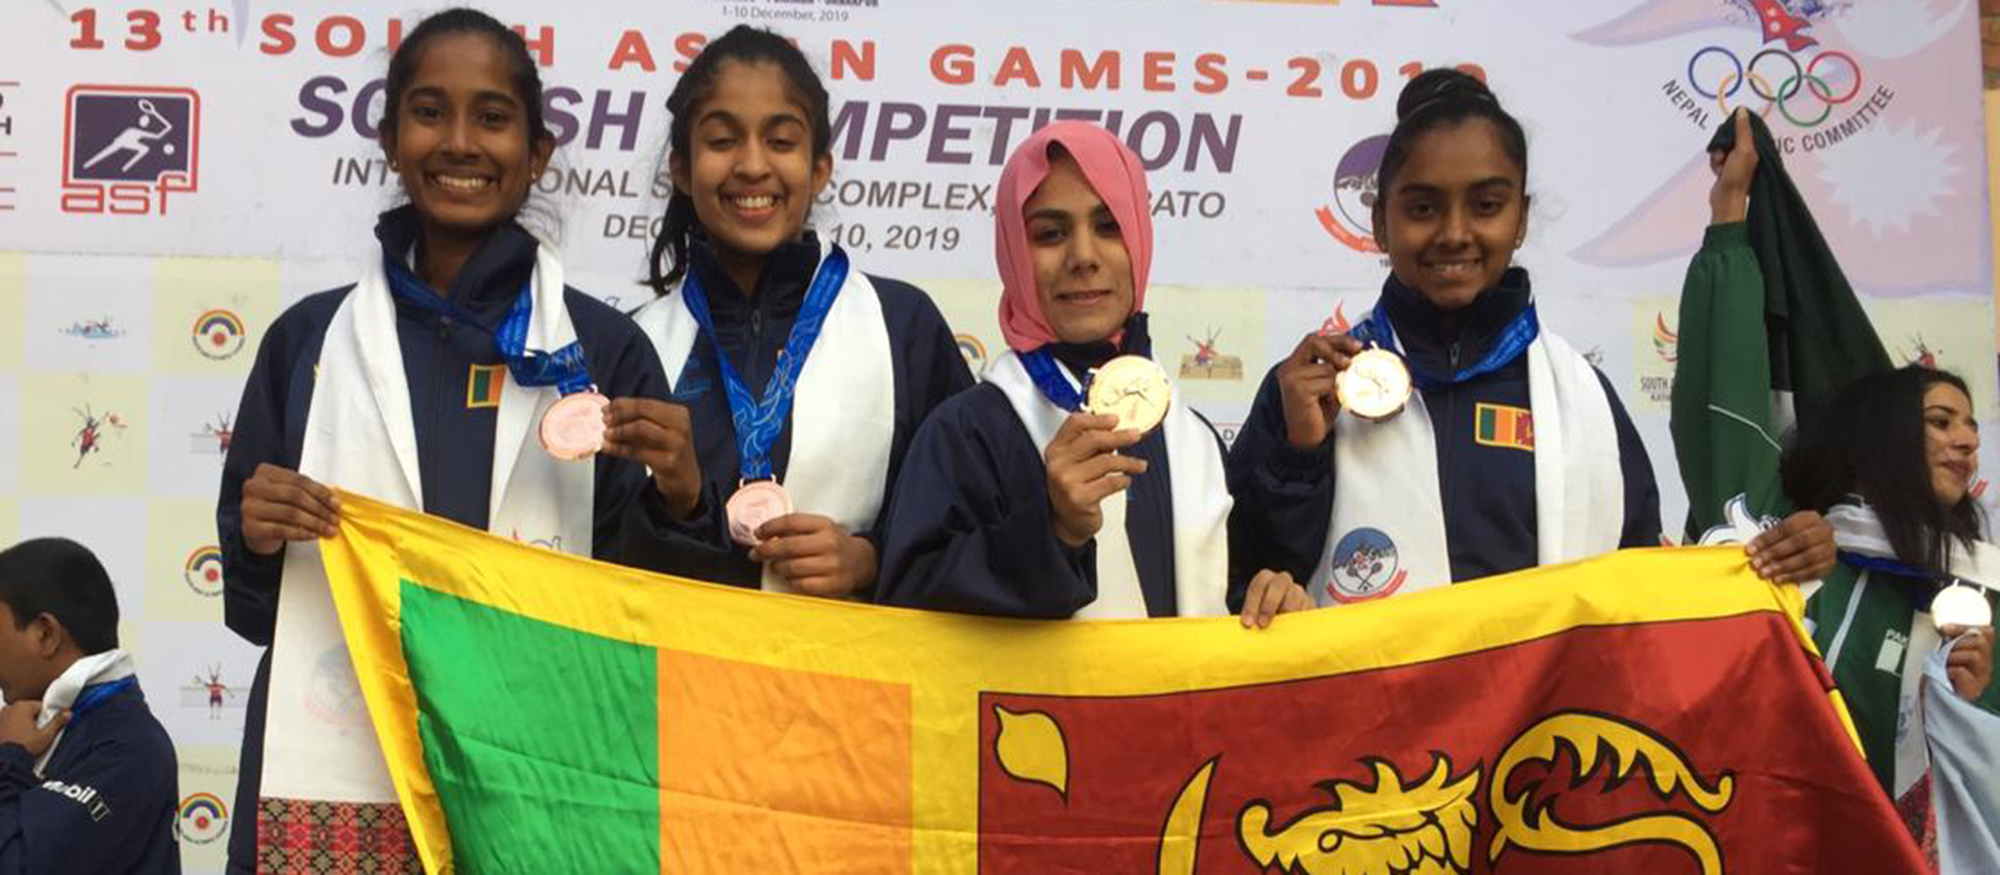 Squash's Methsarani Helps Sri Lanka to Bronze Medal at 13th South Asian Games in Nepal